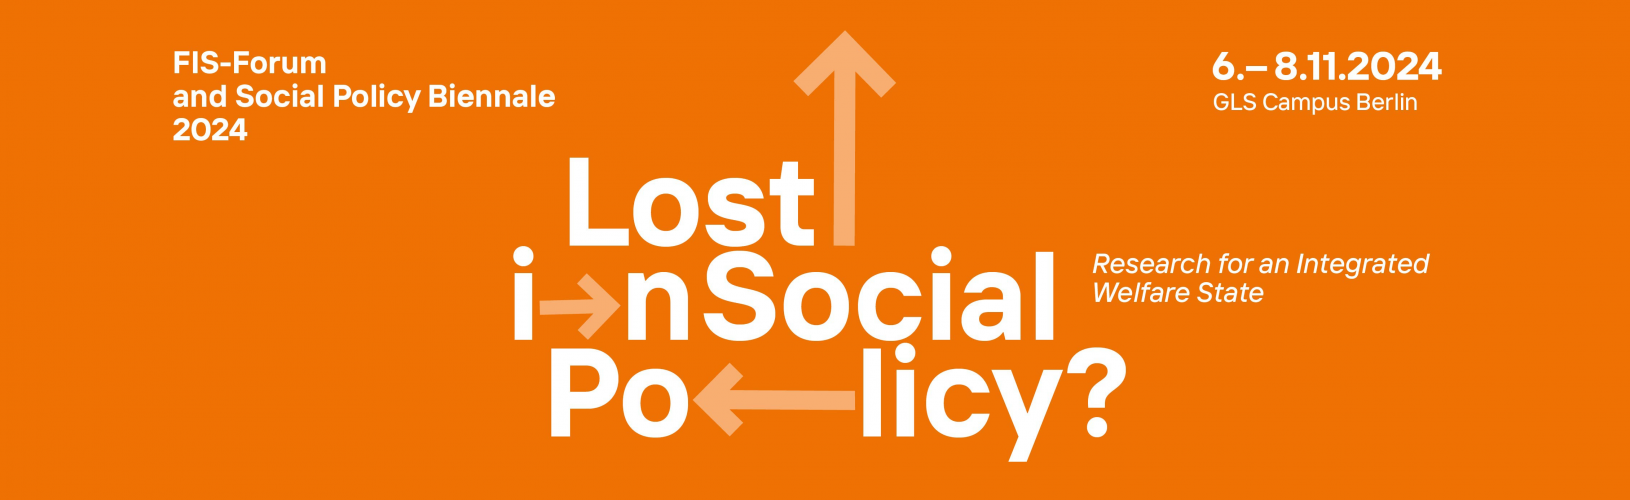 "Save The Date: FIS Forum with the Social Policy Biennale 2024: Lost in Social Policy? Research for an integrated welfare state, Berlin 6-8 November 2024"